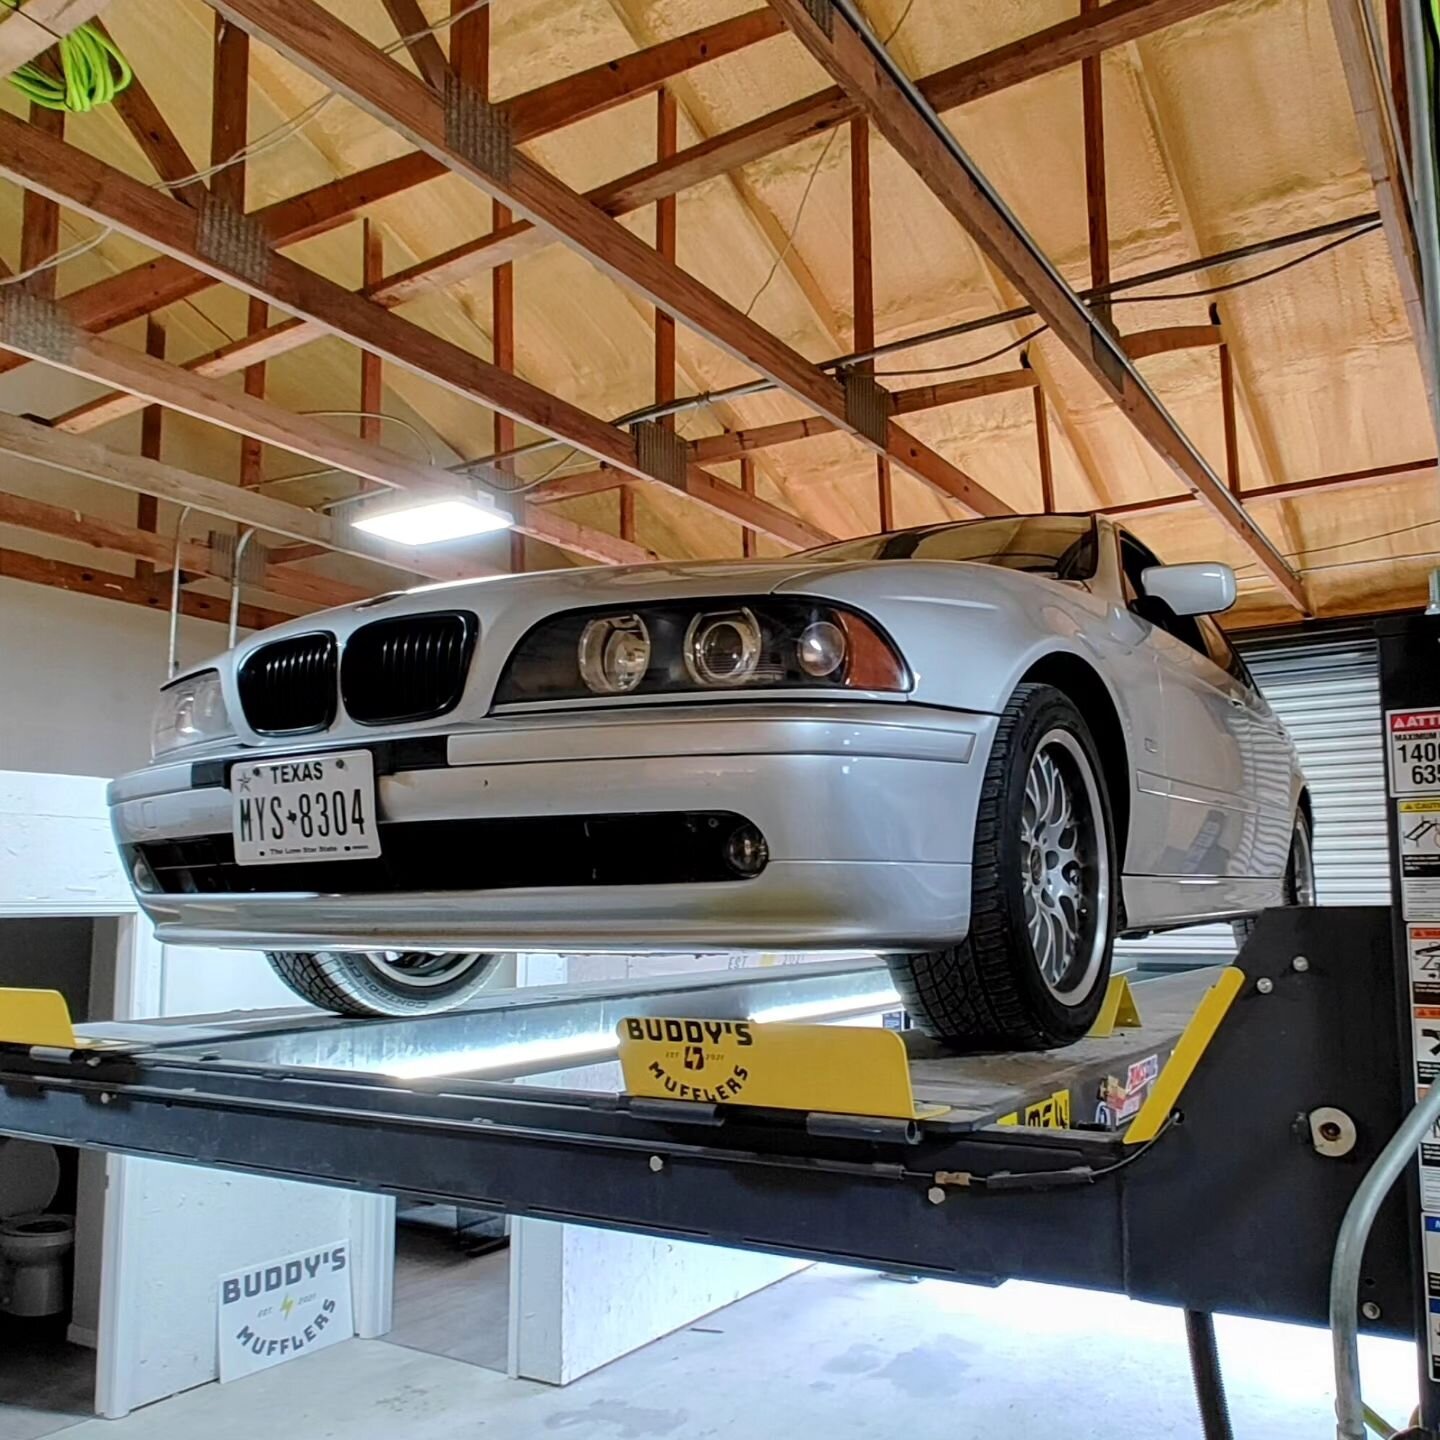 On the lift today we had a #bmw #e39 #5series in to bring the dual 2&quot; exhaust into a single 3&quot; mandrel bent stainless system. Kept a turndown on the end to keep it tucked away. Sounds nice and deep.
Who's next?
#buddysmufflerstx

Check out 